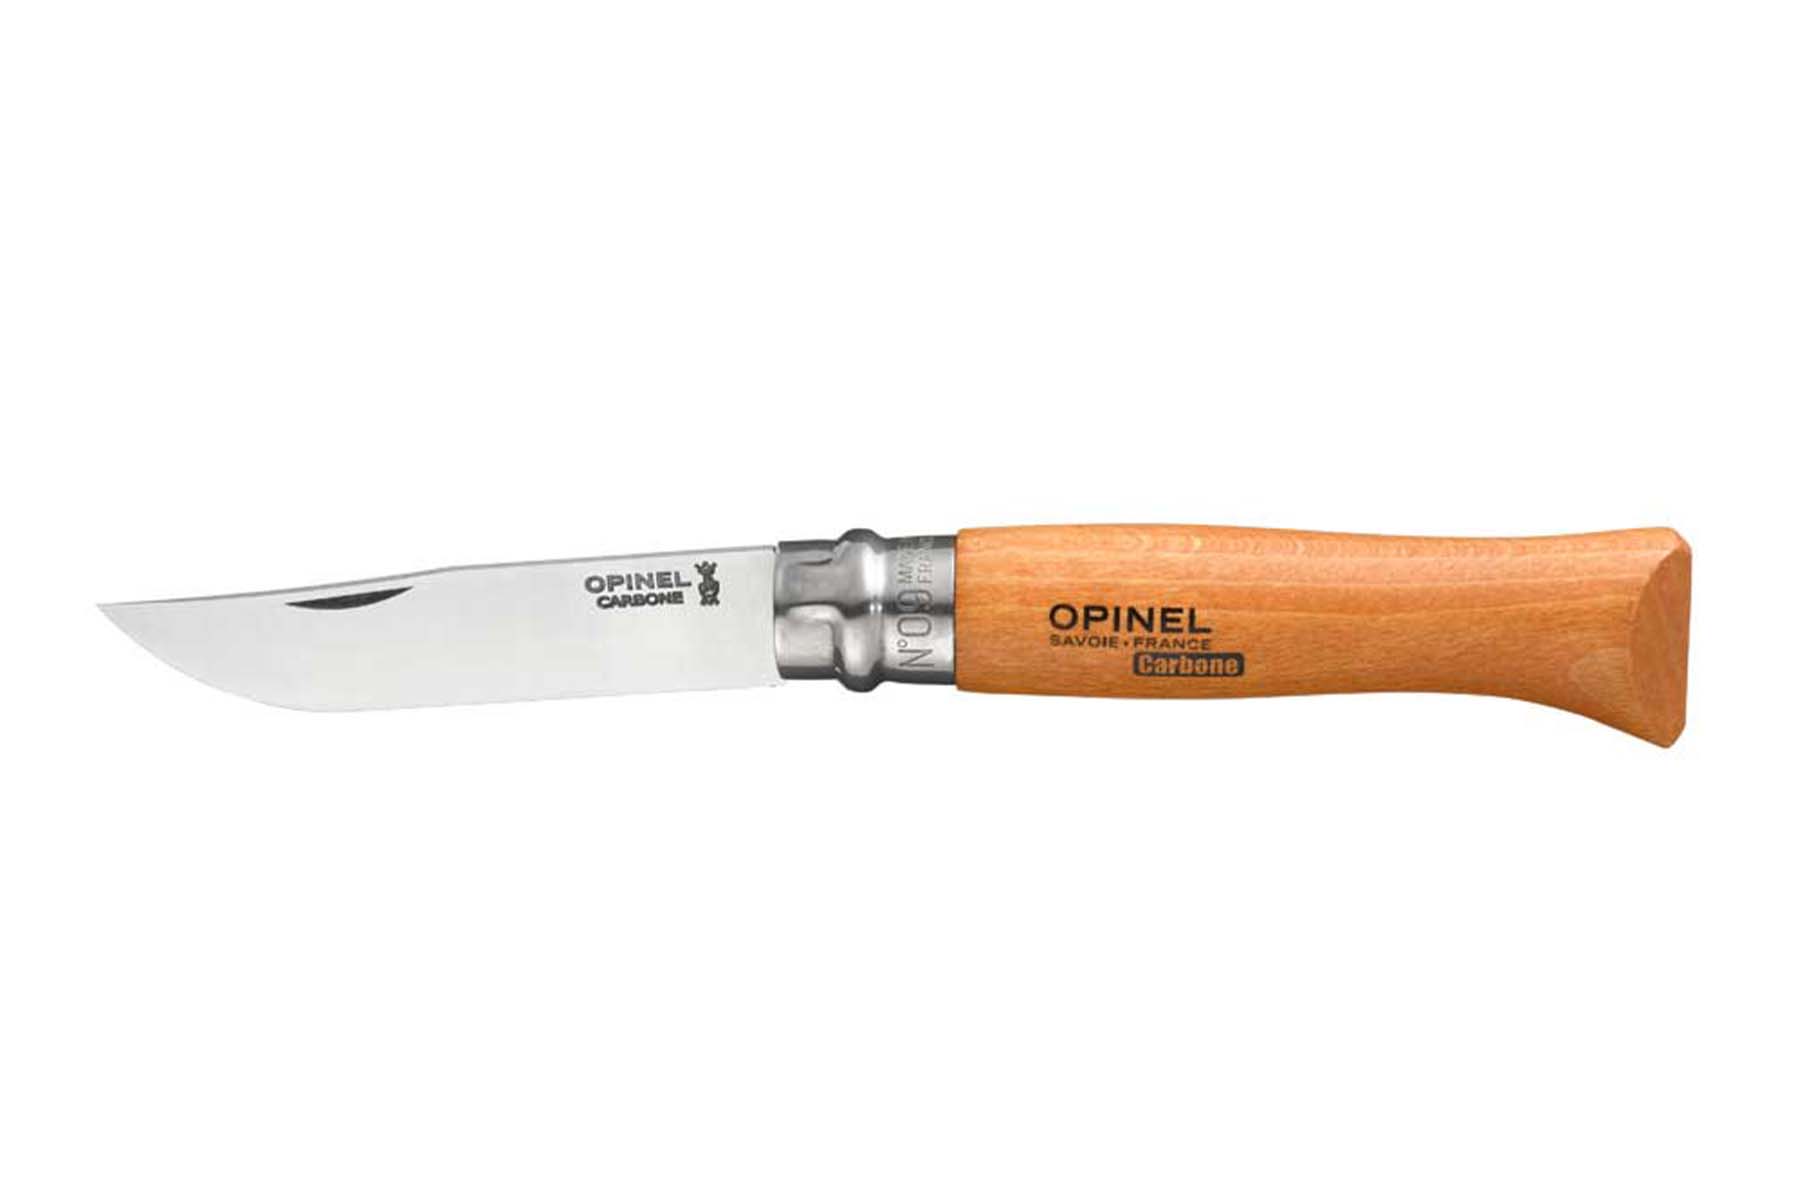 Couteau Opinel n°09 lame carbone